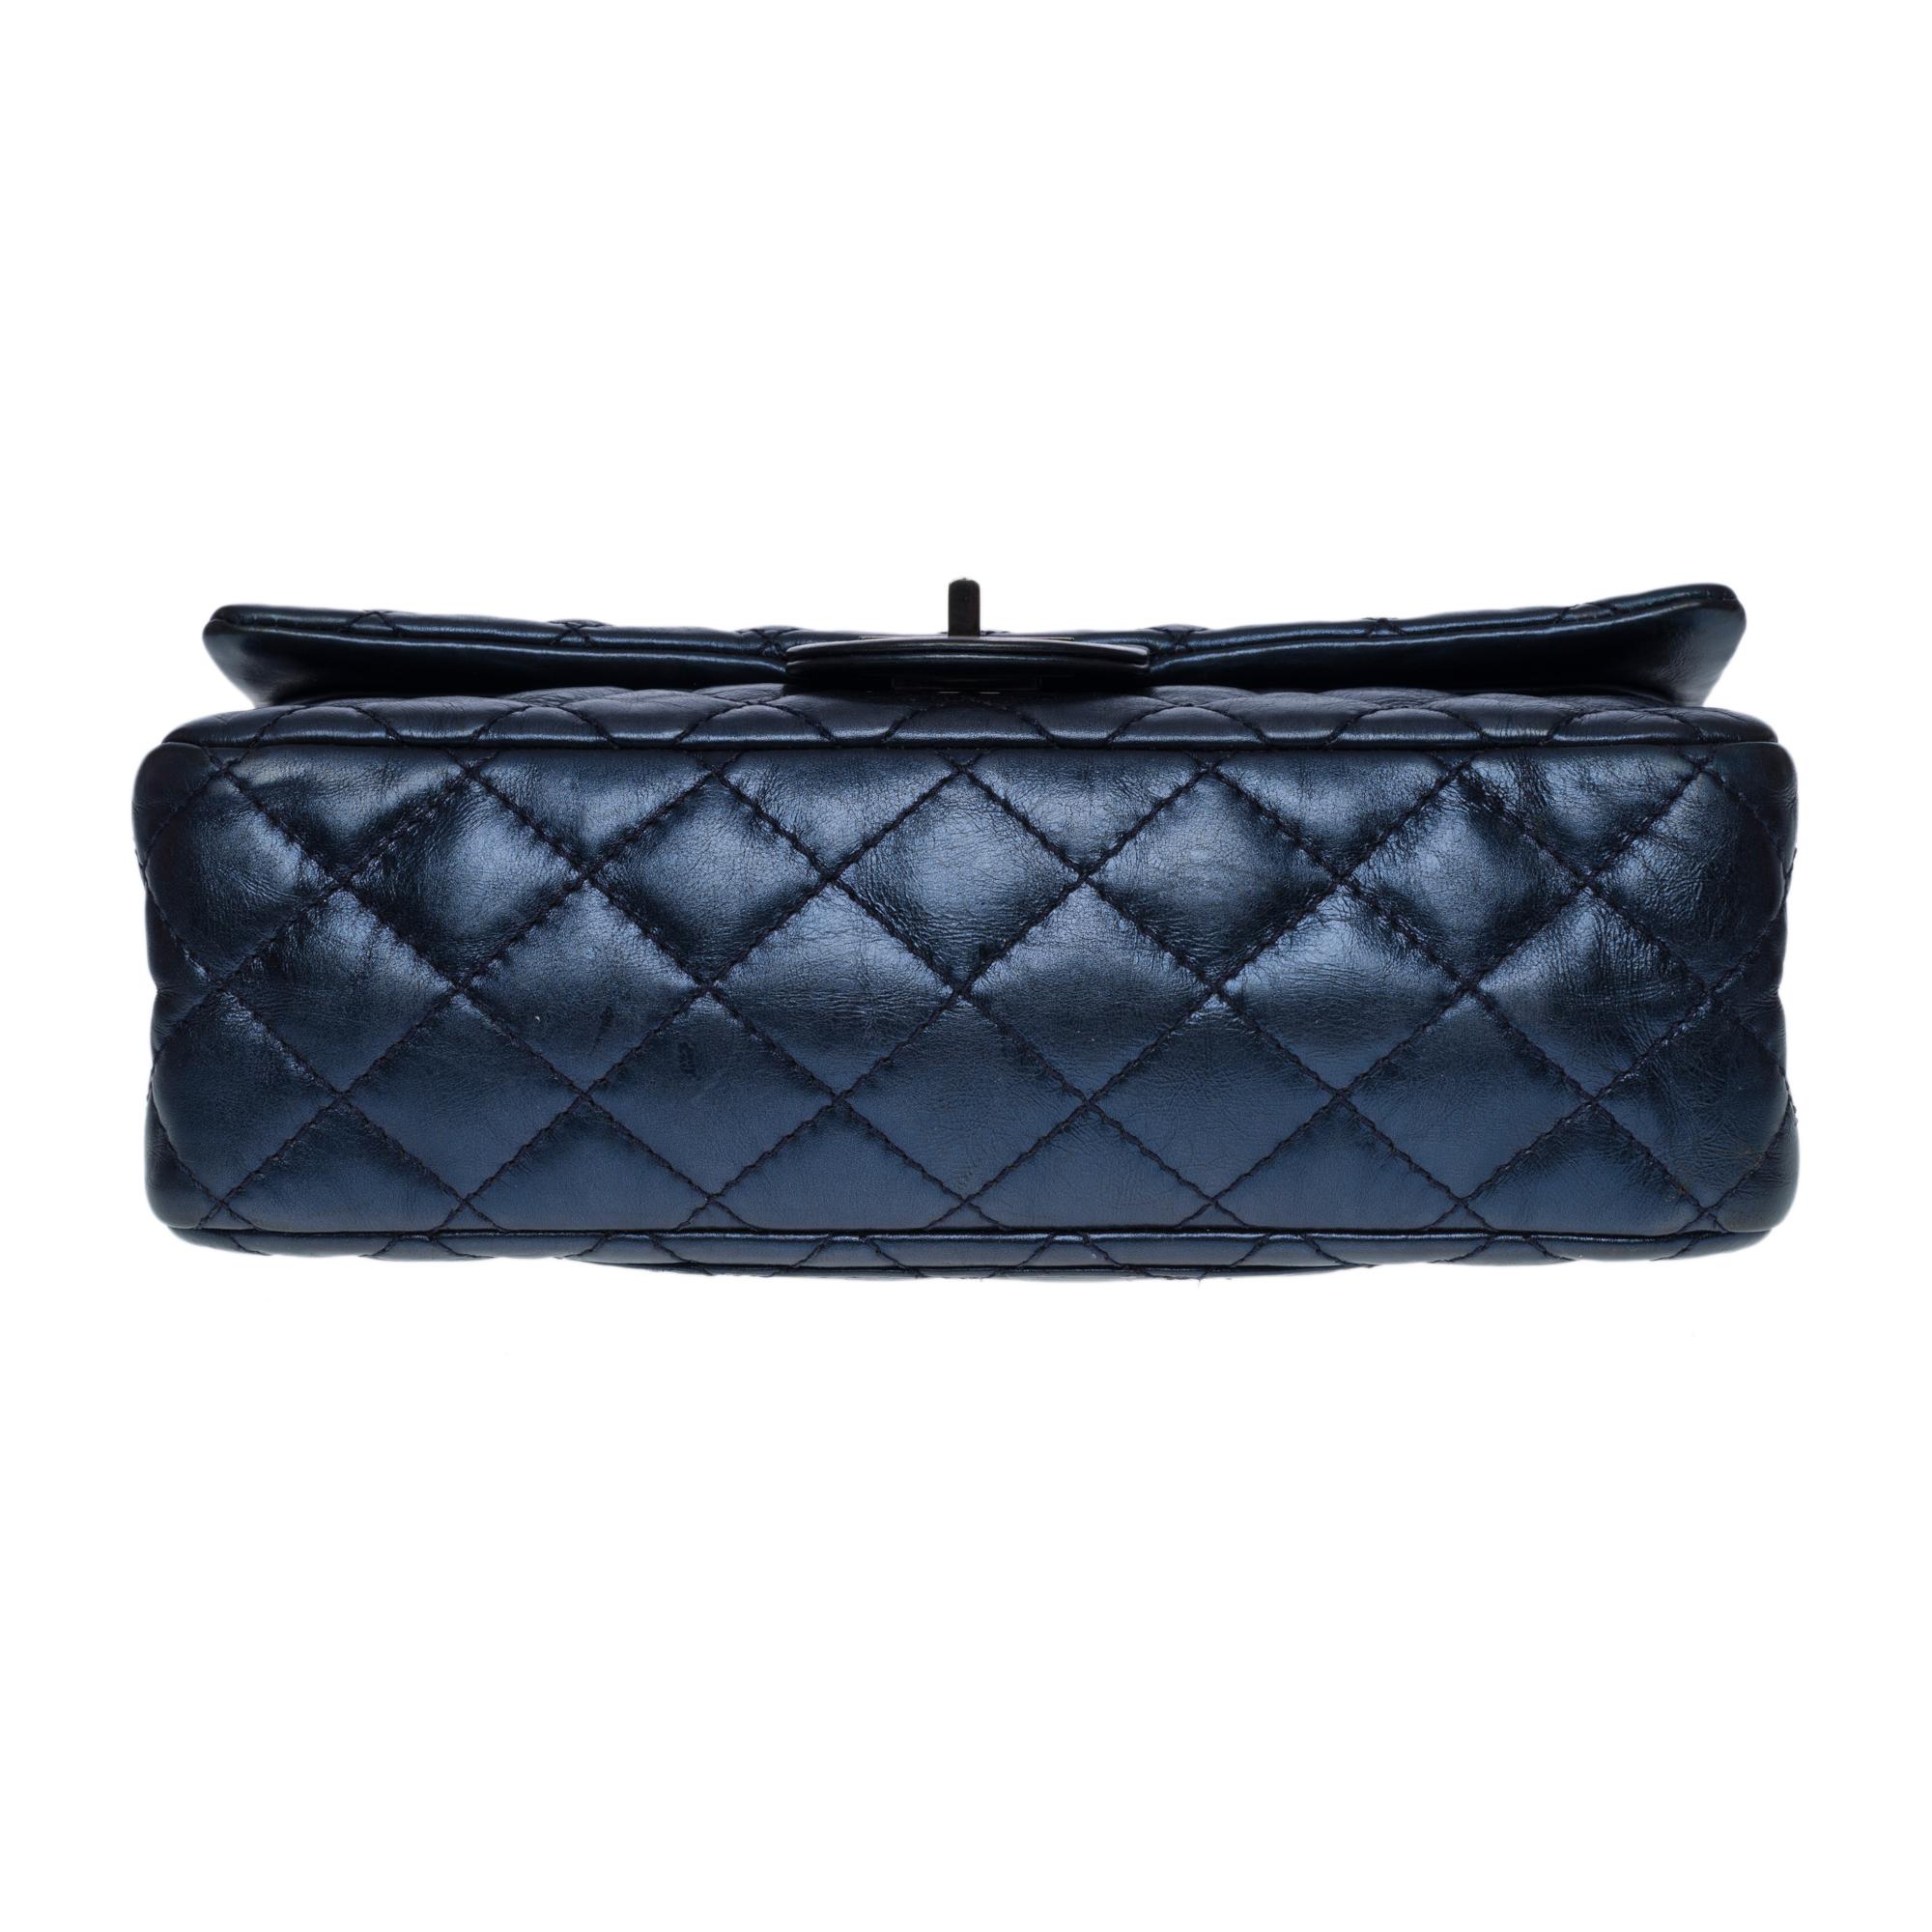 Chanel Classic 2.55 shoulder bag in metallic blue iridescent quilted leather, SHW 3